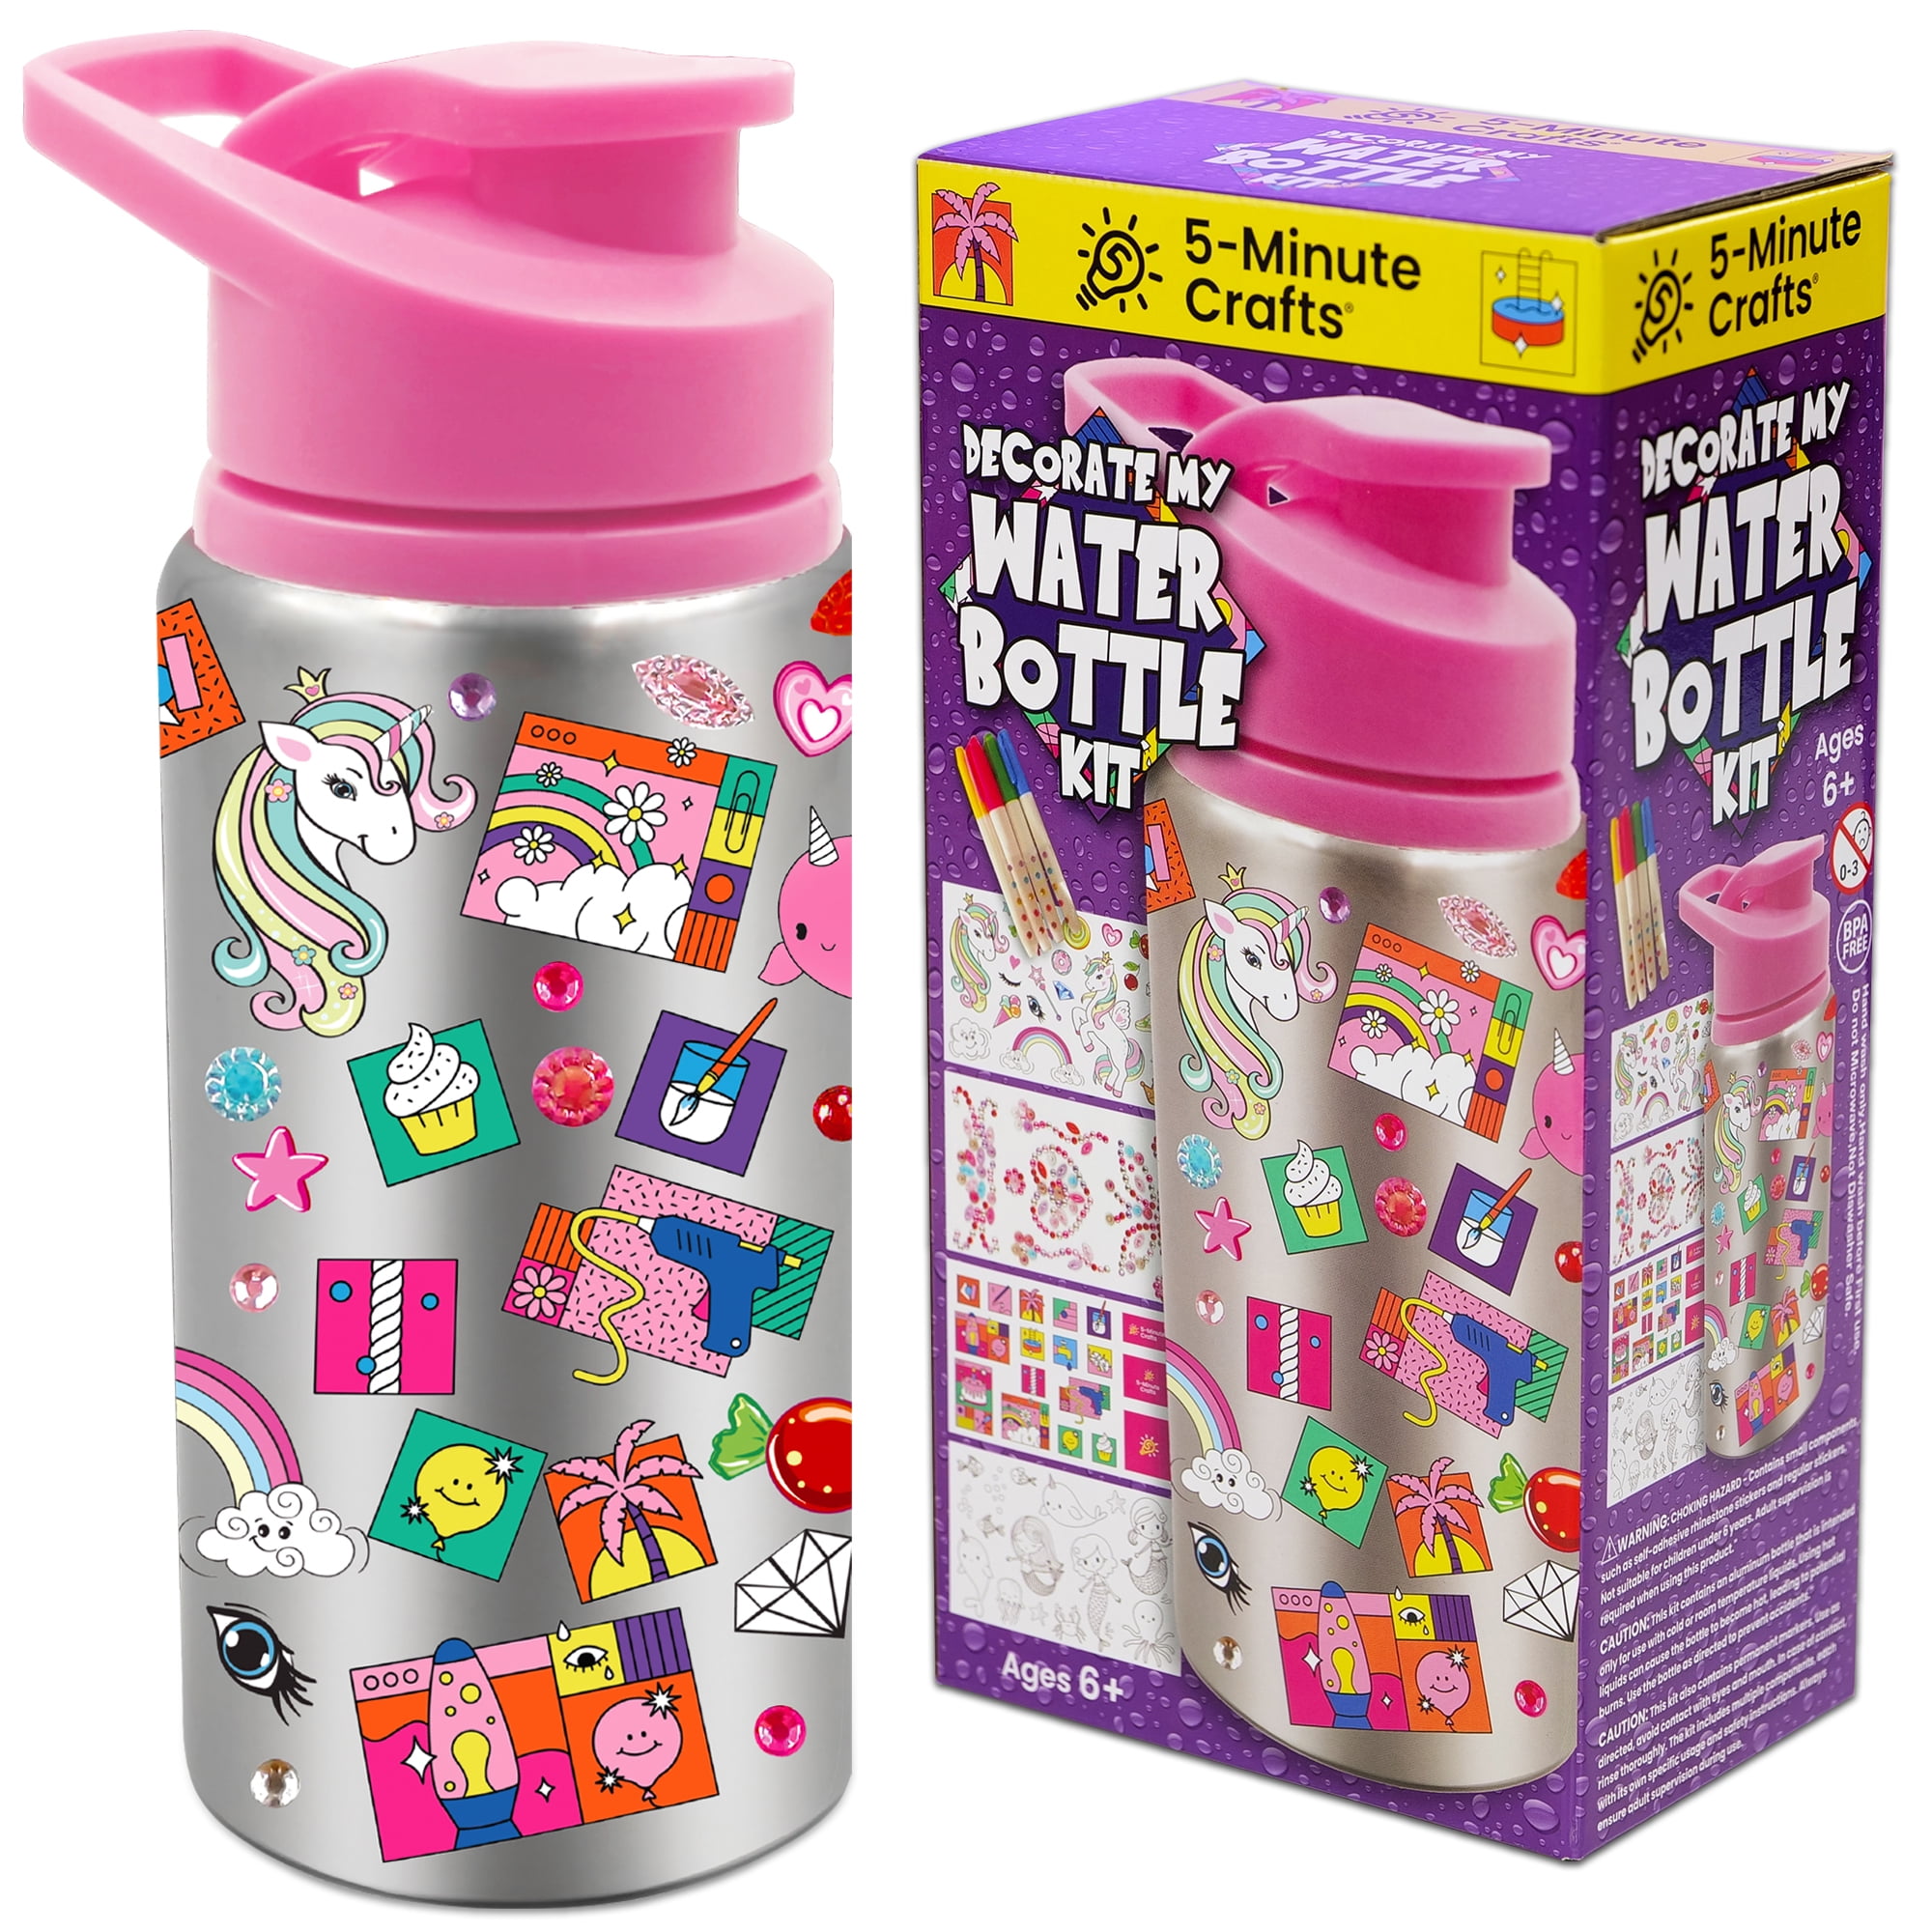 domila Gift for Boys, Decorate Your Own Water Bottle with Fun Stickers  Crafts Kit and DIY Arts Set Blue Vacuum Insulated Travel Mug